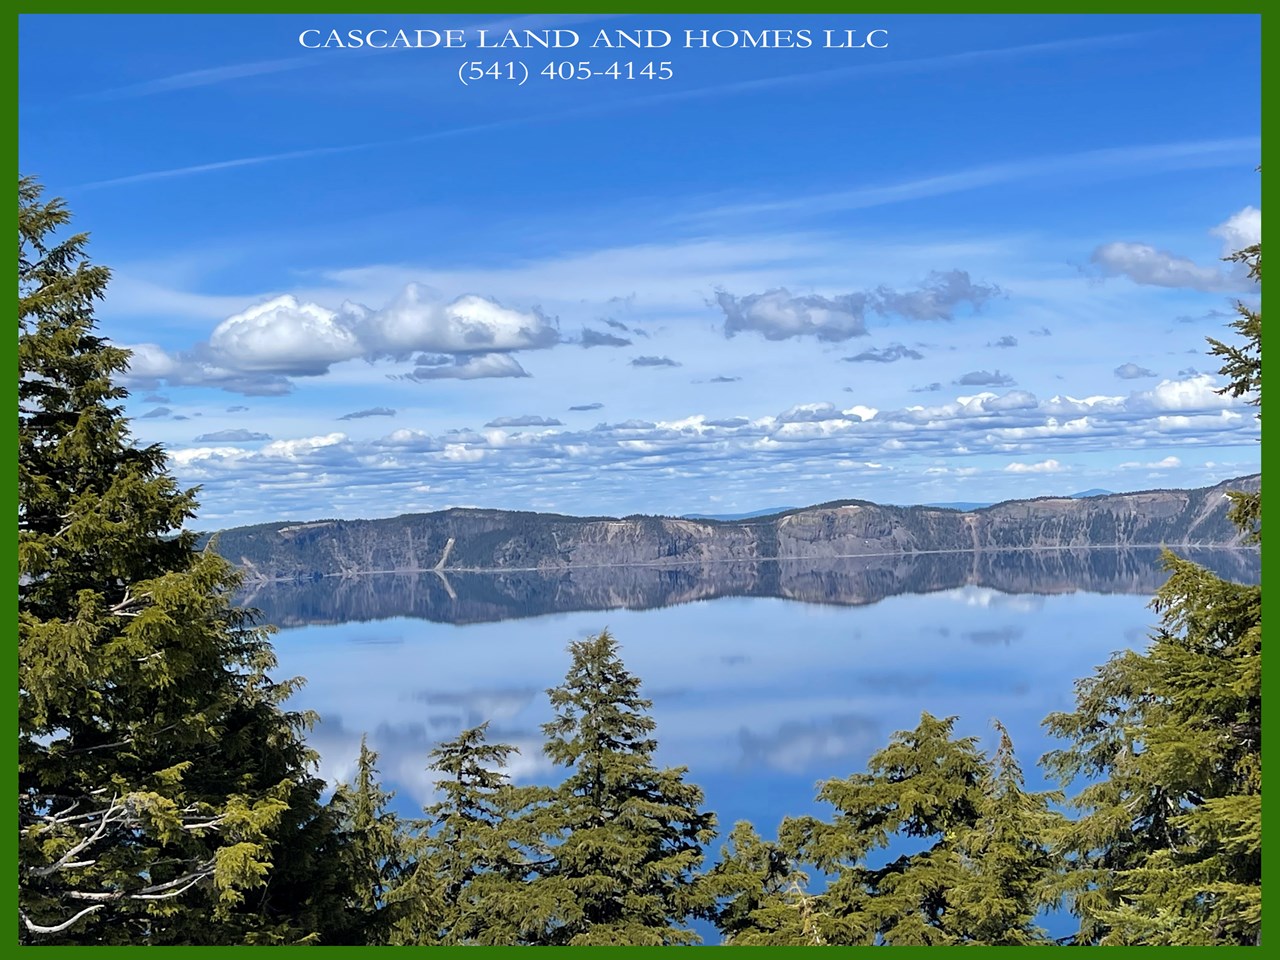 crater lake national park is only about 45 minutes from here! come explore, there is so much to do here!